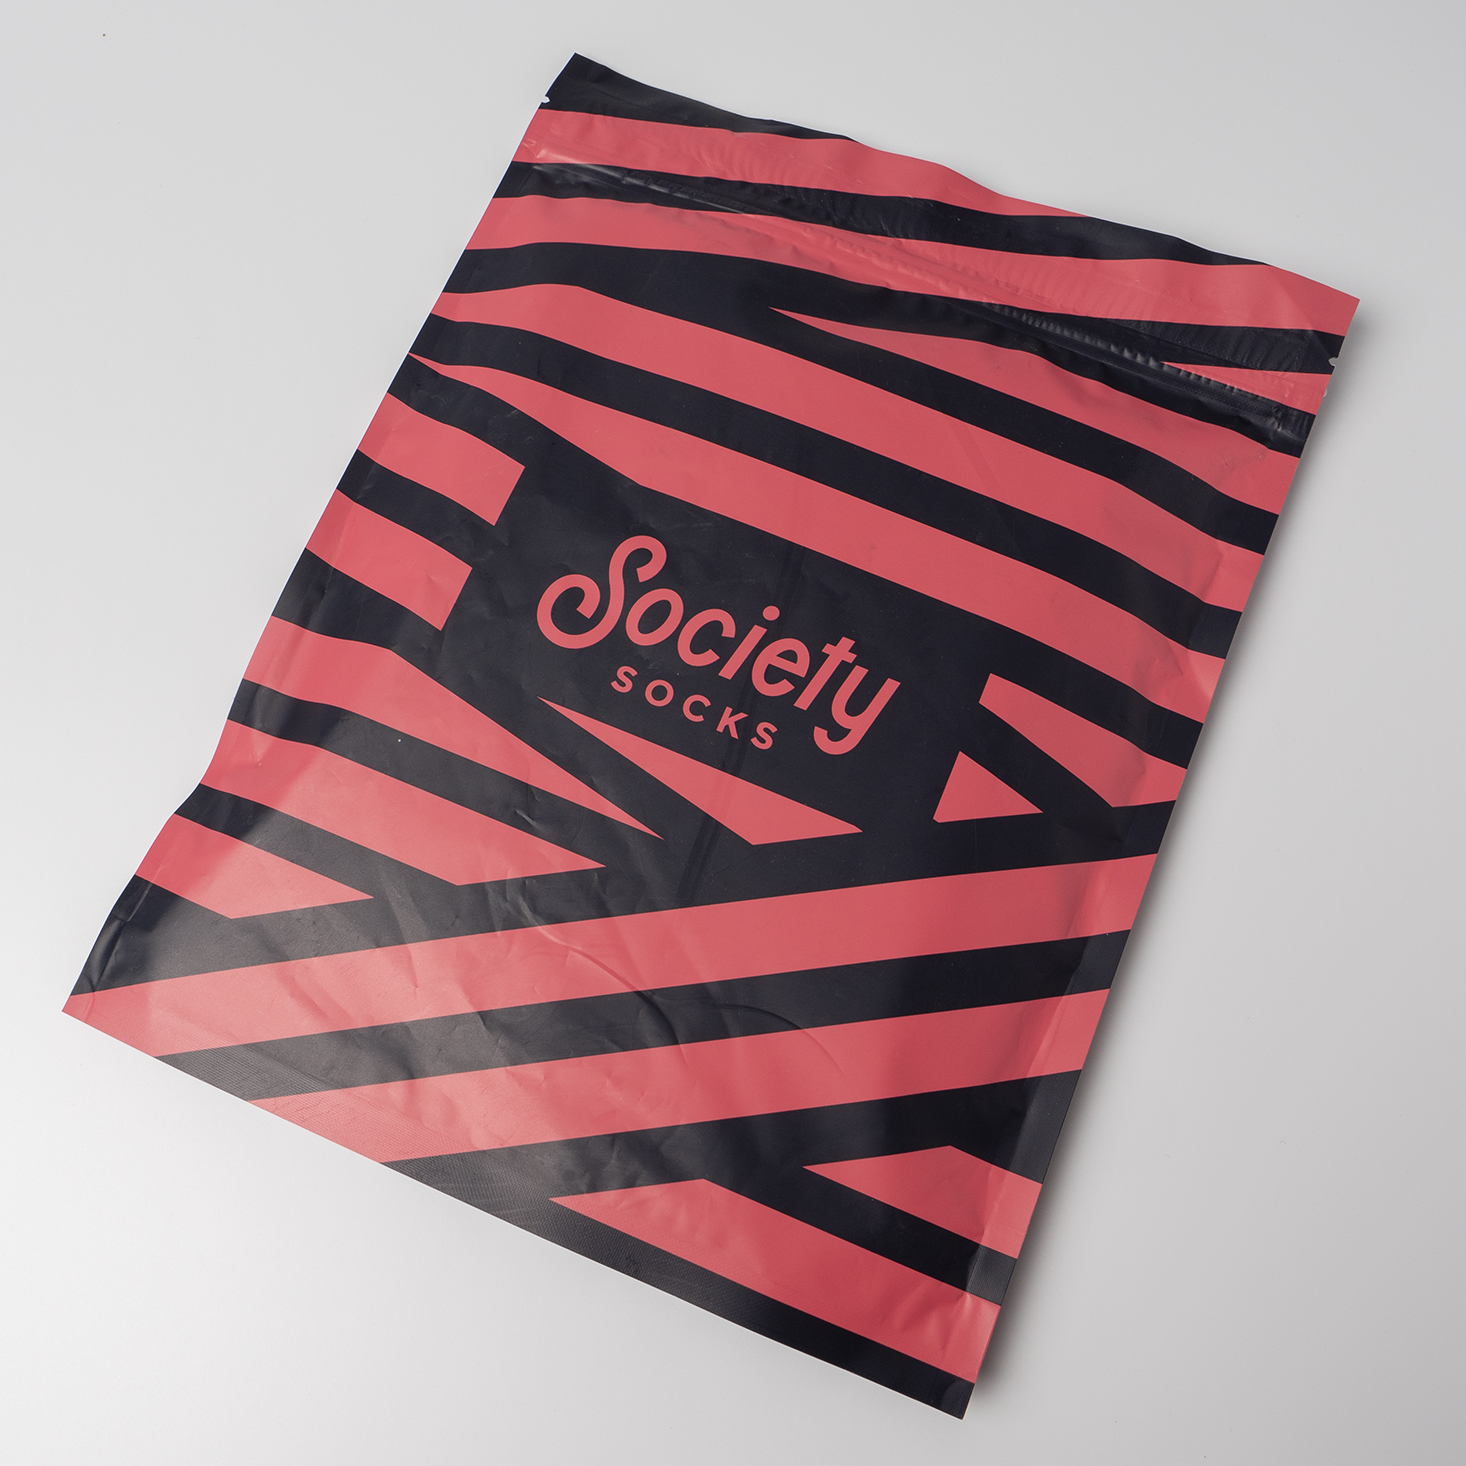 Society Socks Review + 50% Off Coupon – March 2020